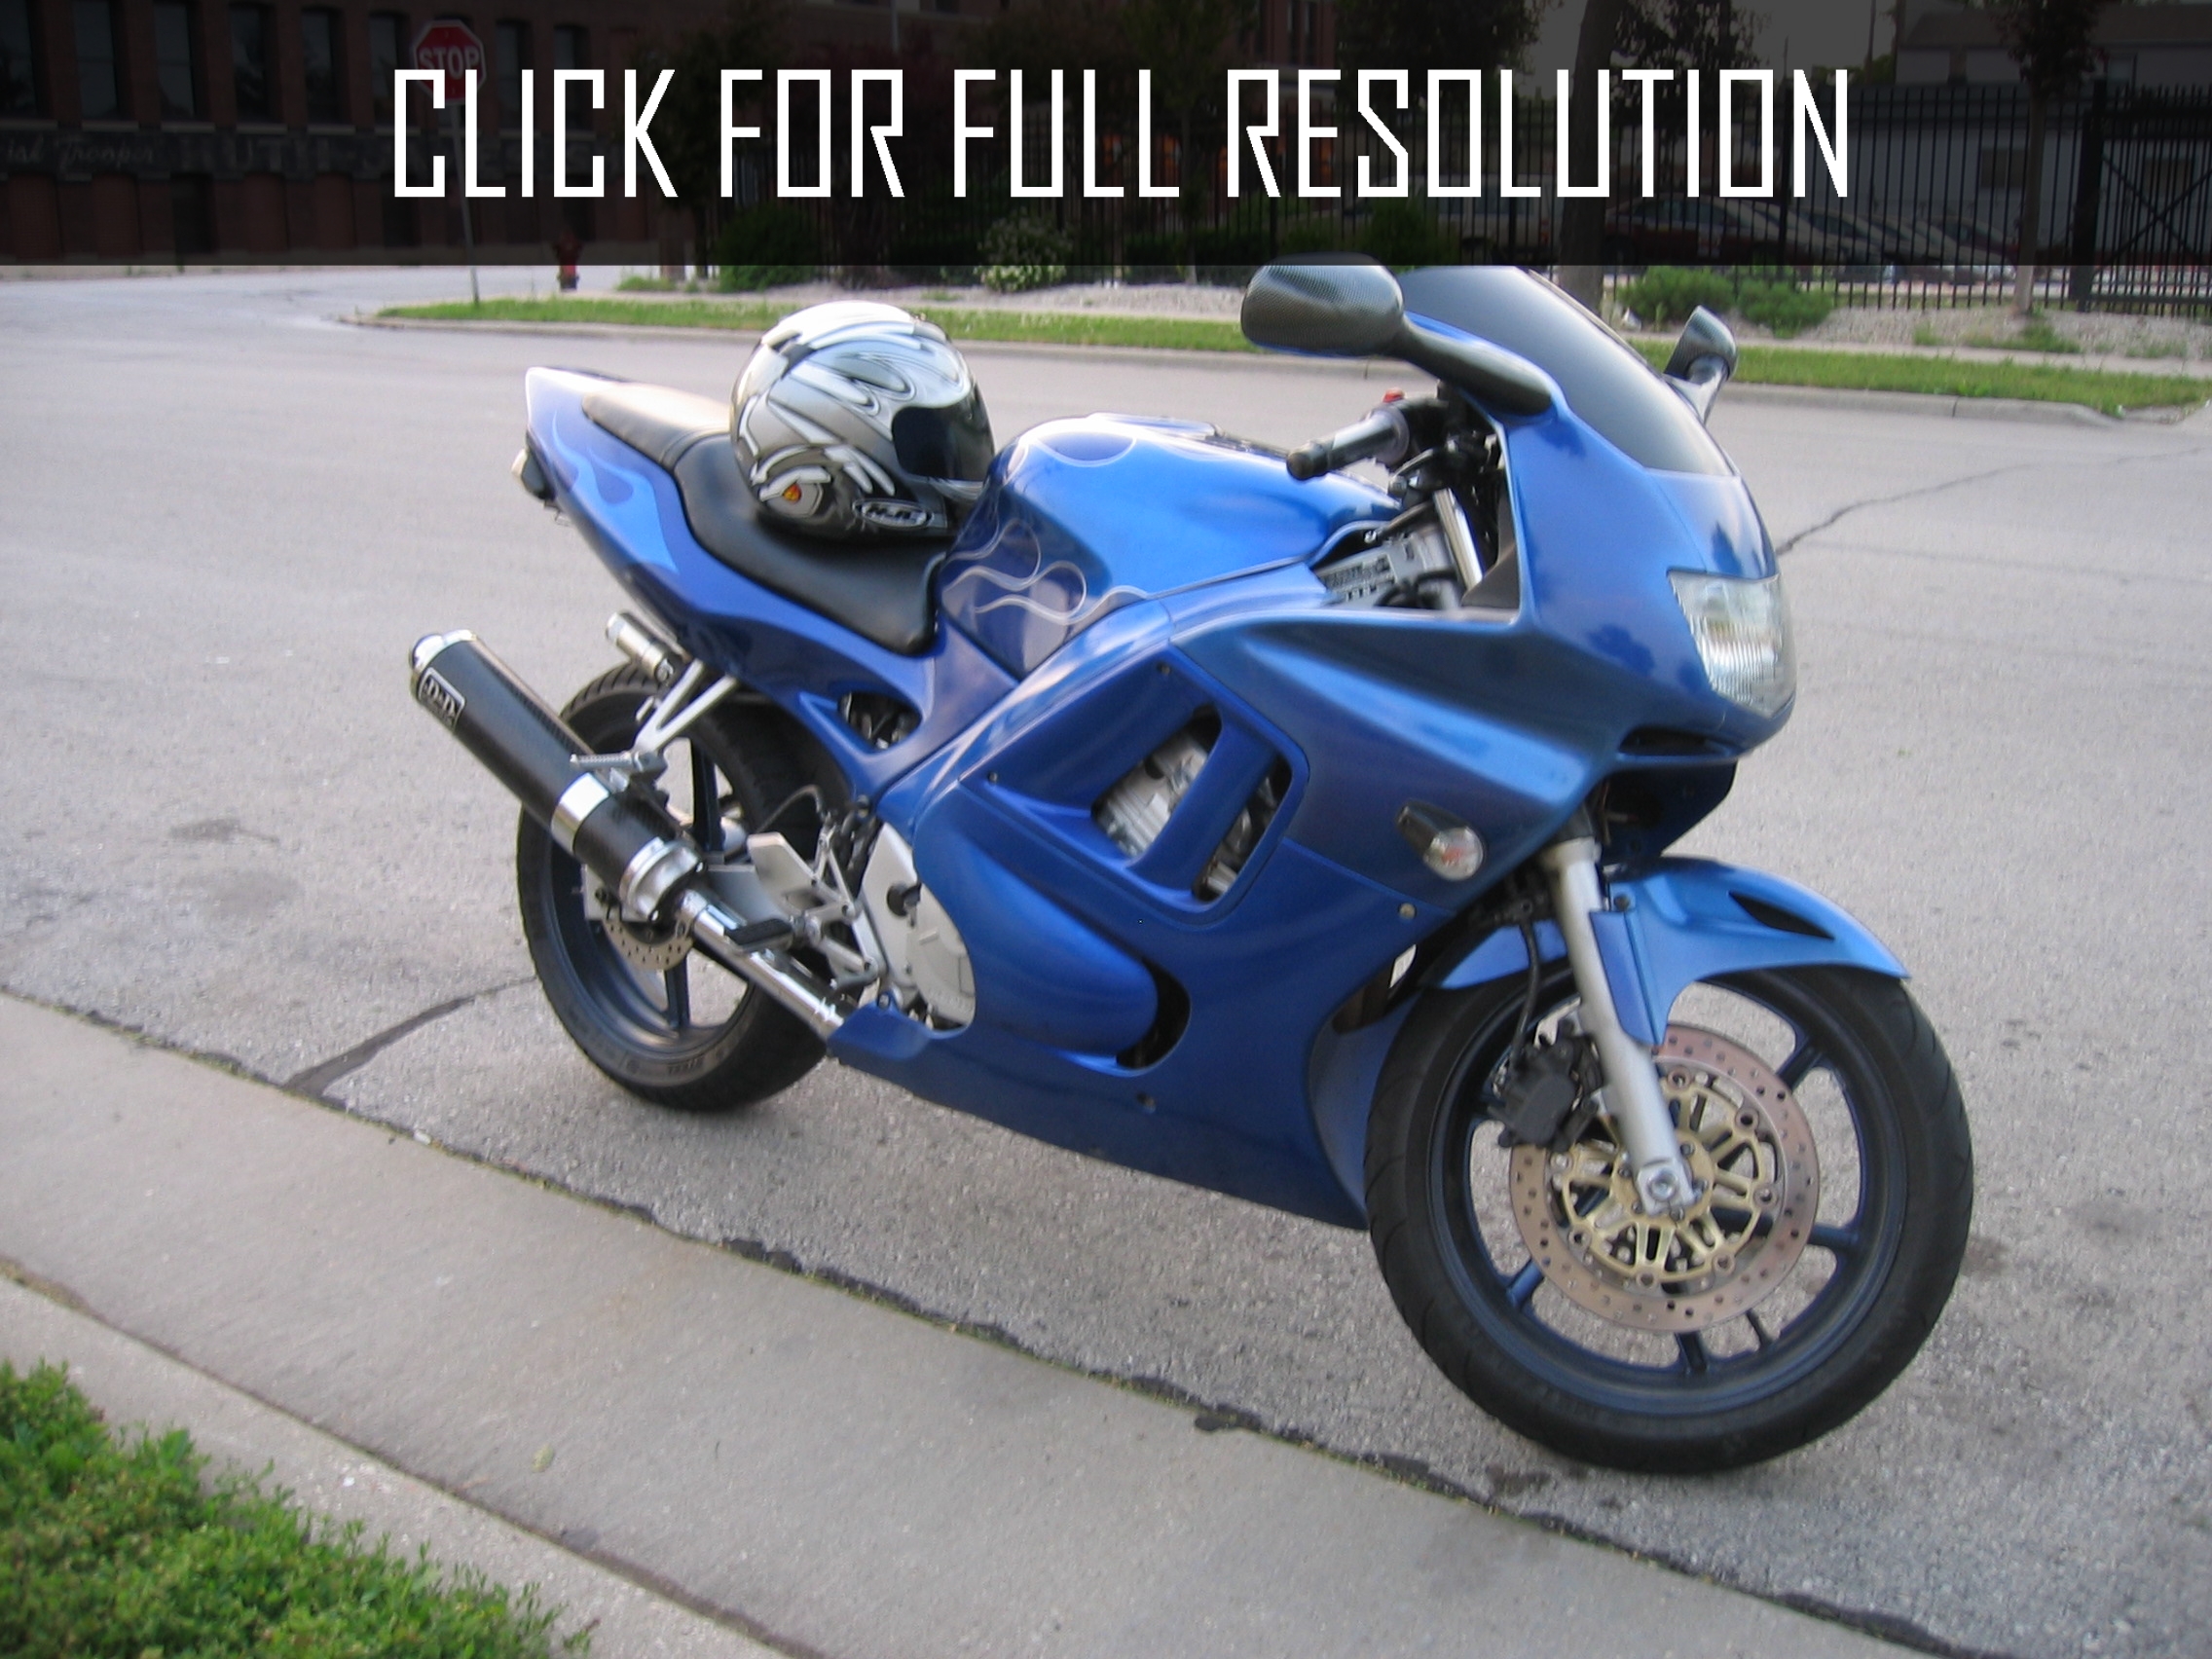 1998 Honda Cbr 600 news, reviews, msrp, ratings with